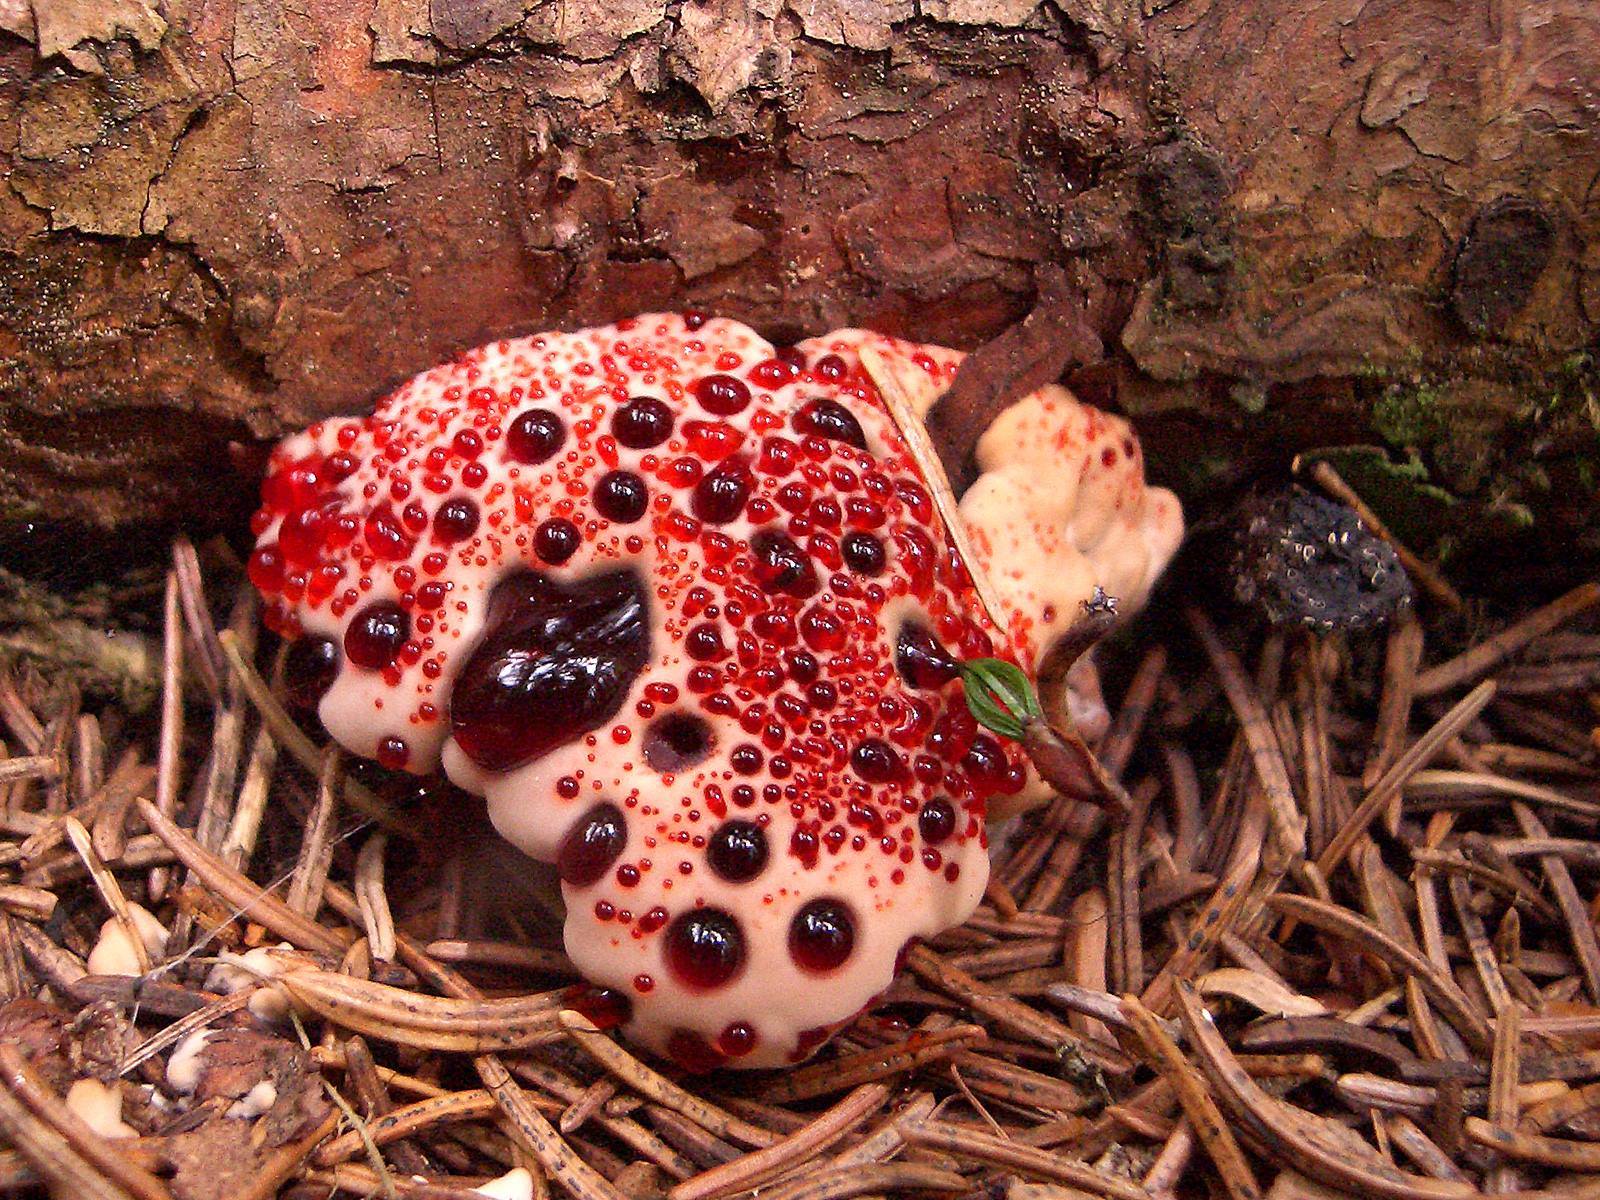 The bleeding tooth fungus grows in Europe and North America